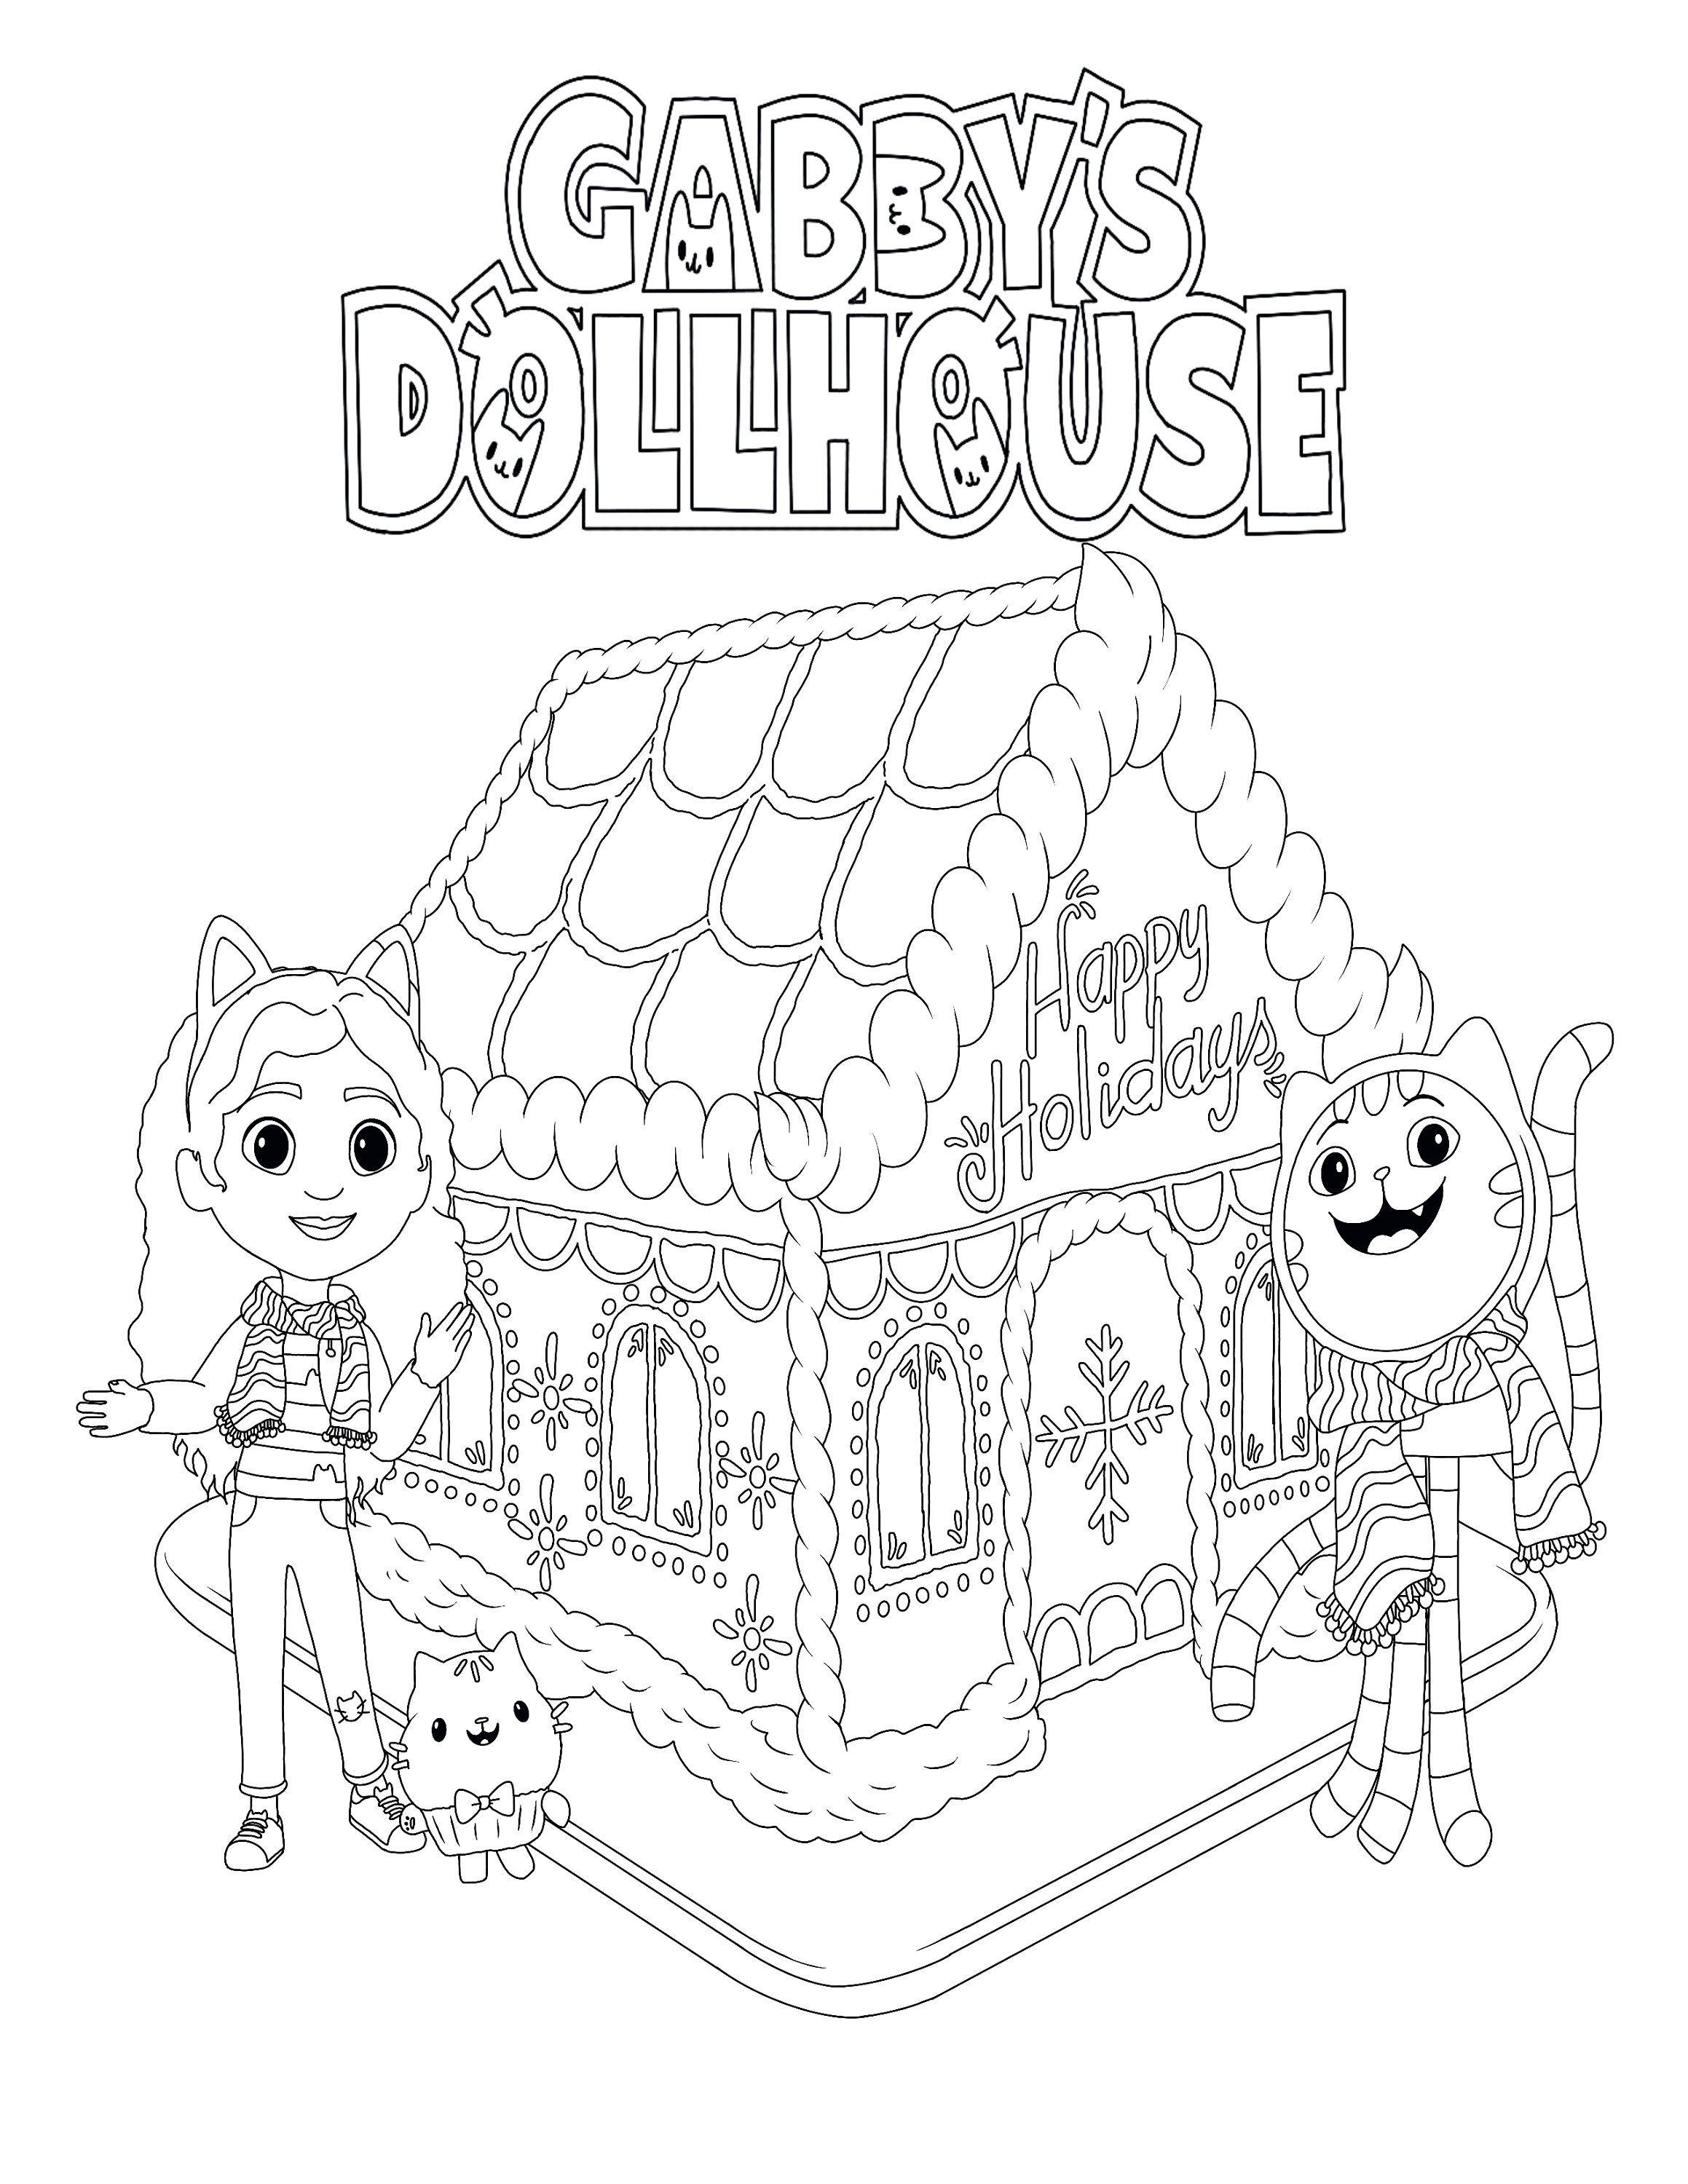 Gabbys Dollhouse Holiday Coloring Page ...